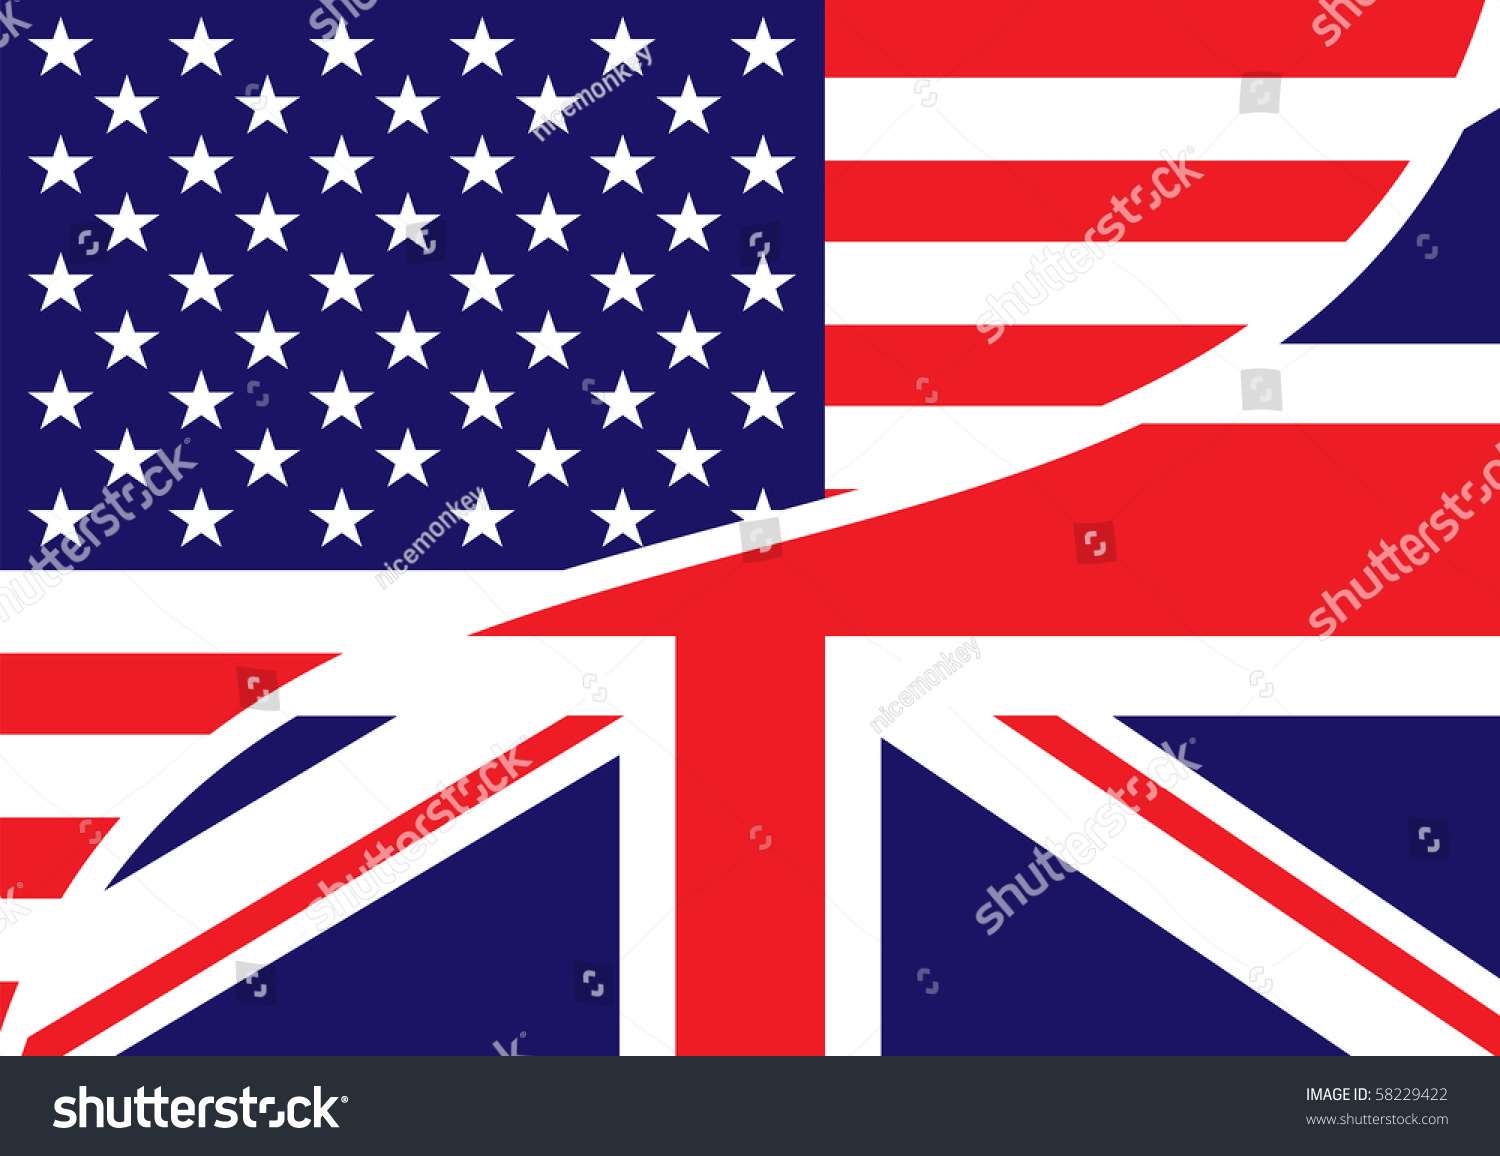 SVG of combined USA and British flags with stars and stripes svg